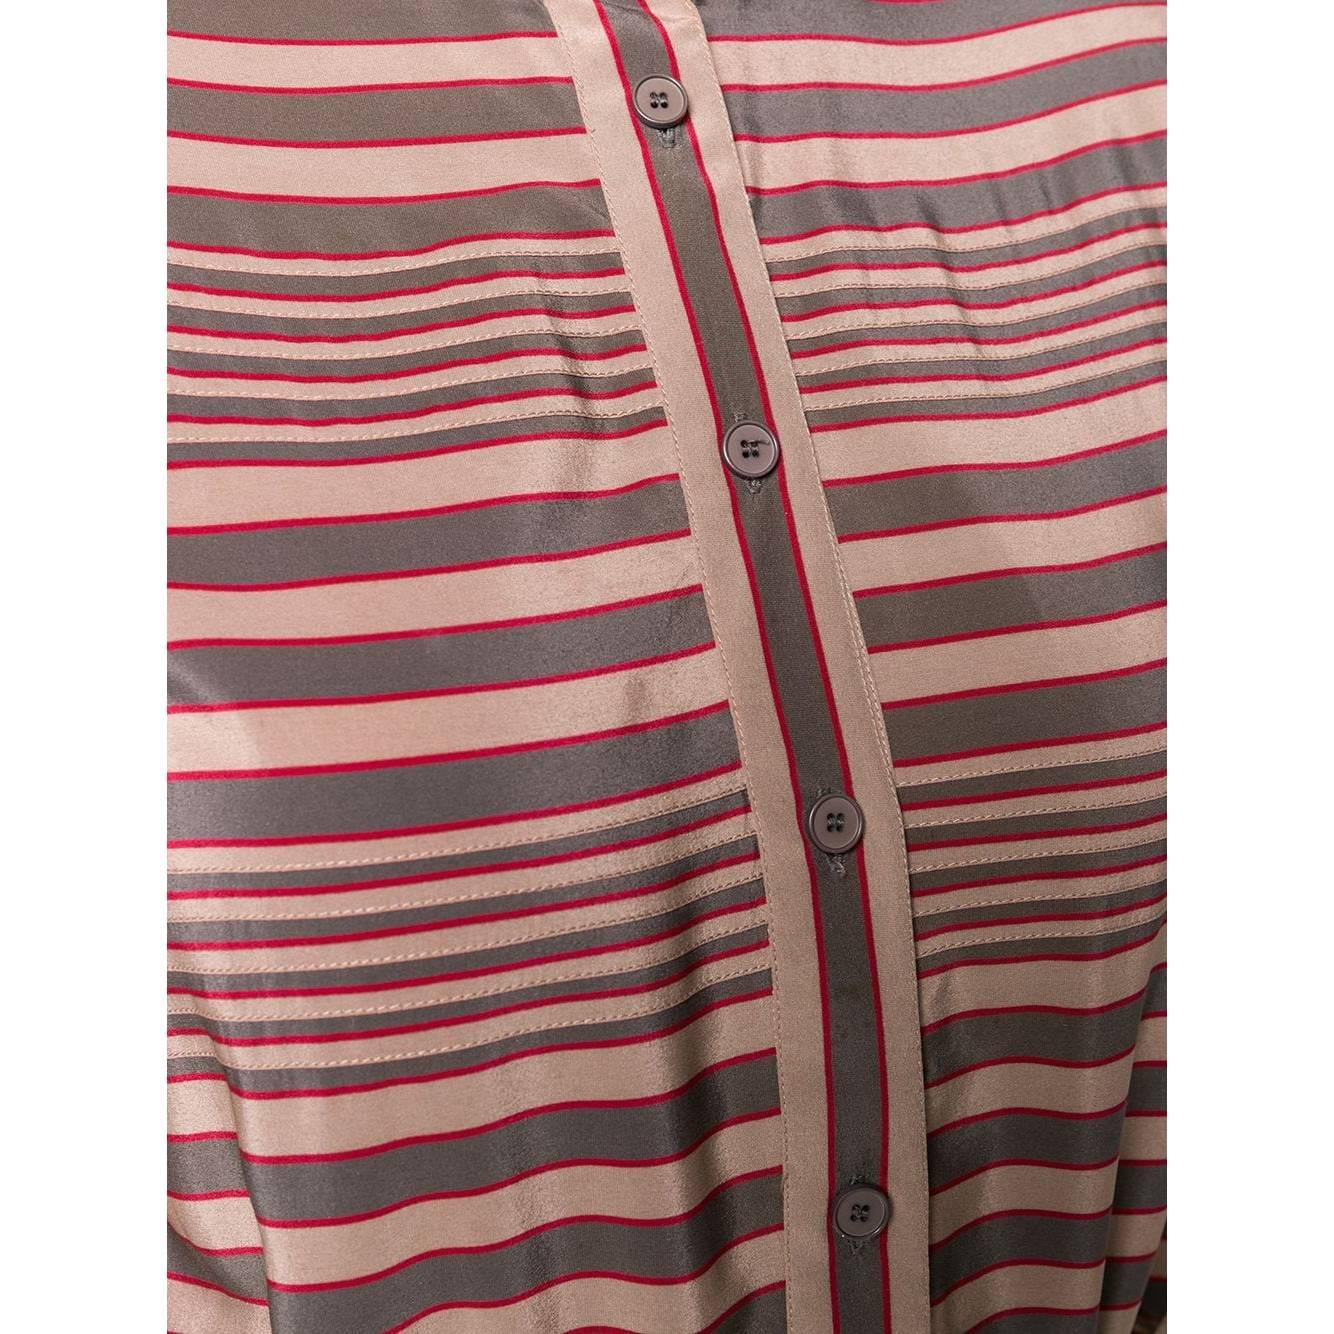 Women's 1970s Ted Lapidus Striped Dress